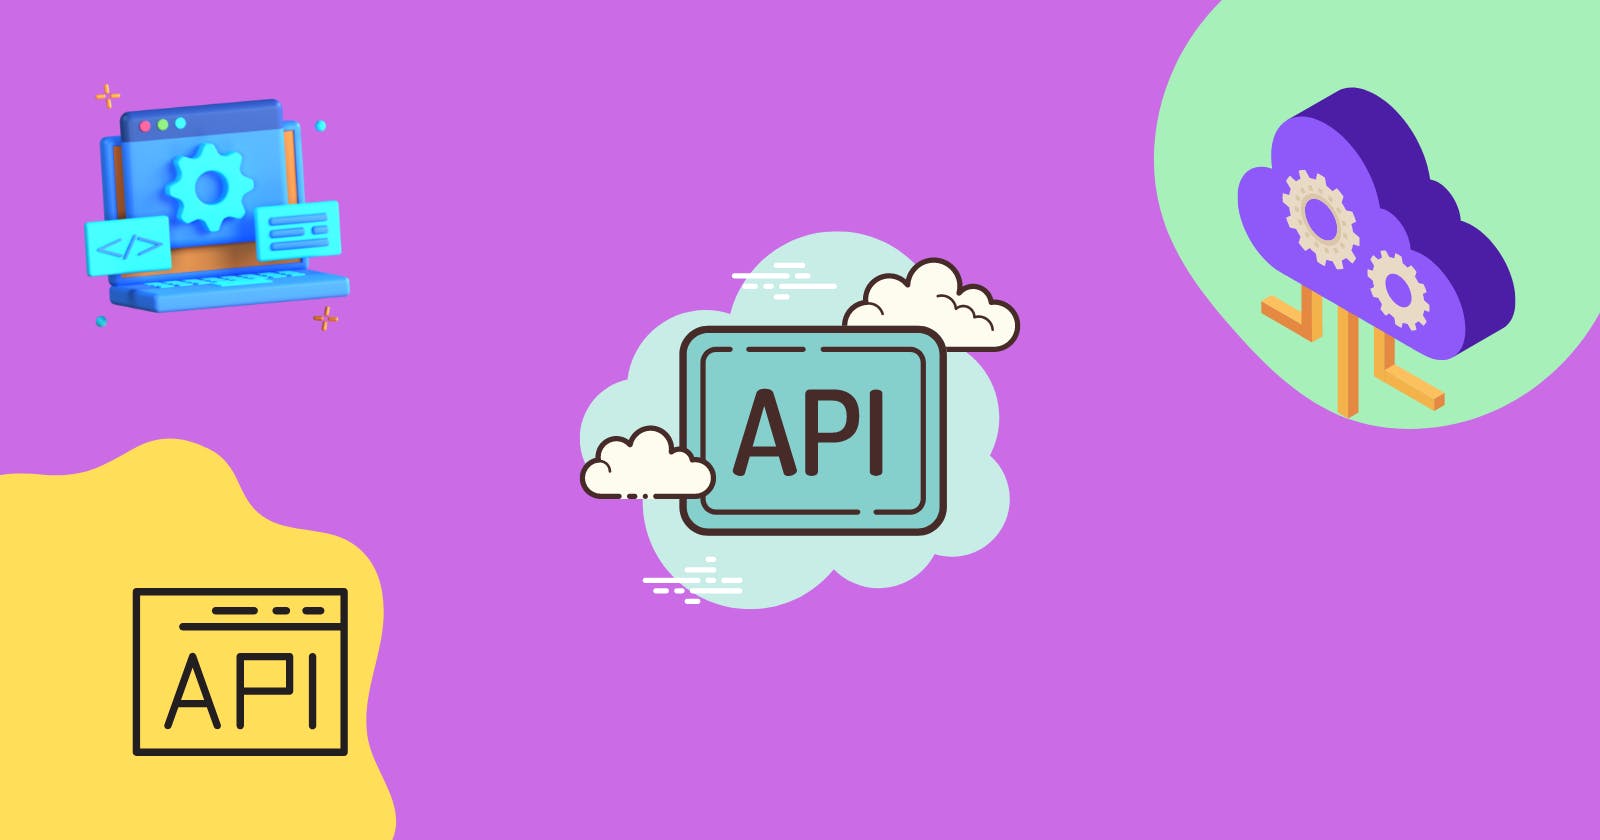 Application Programming Interface (API) in Brief